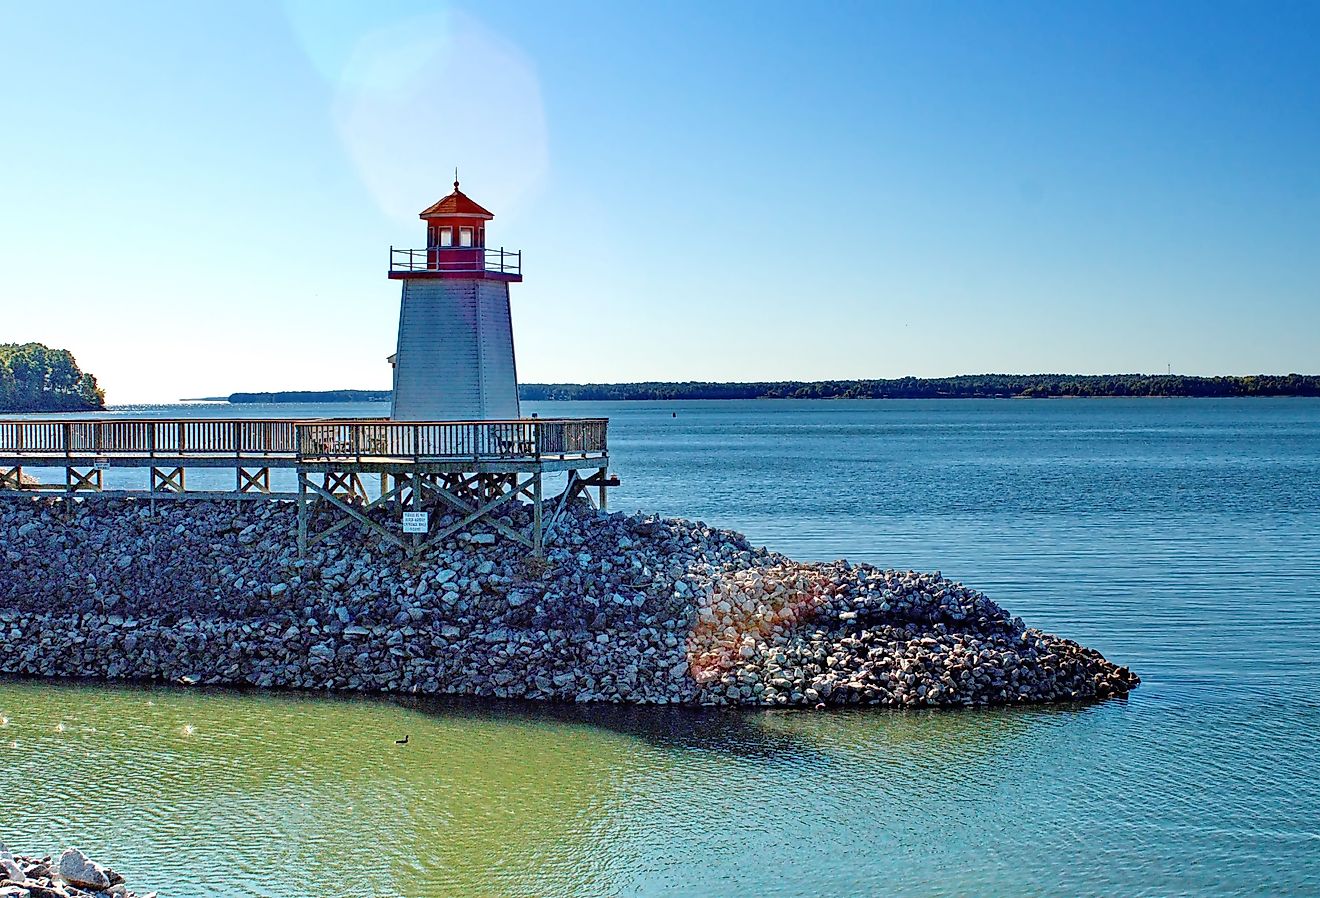 Decorative lighthouse at the end of a jetty in the Ohio River, Paducah, Kentucky, USA